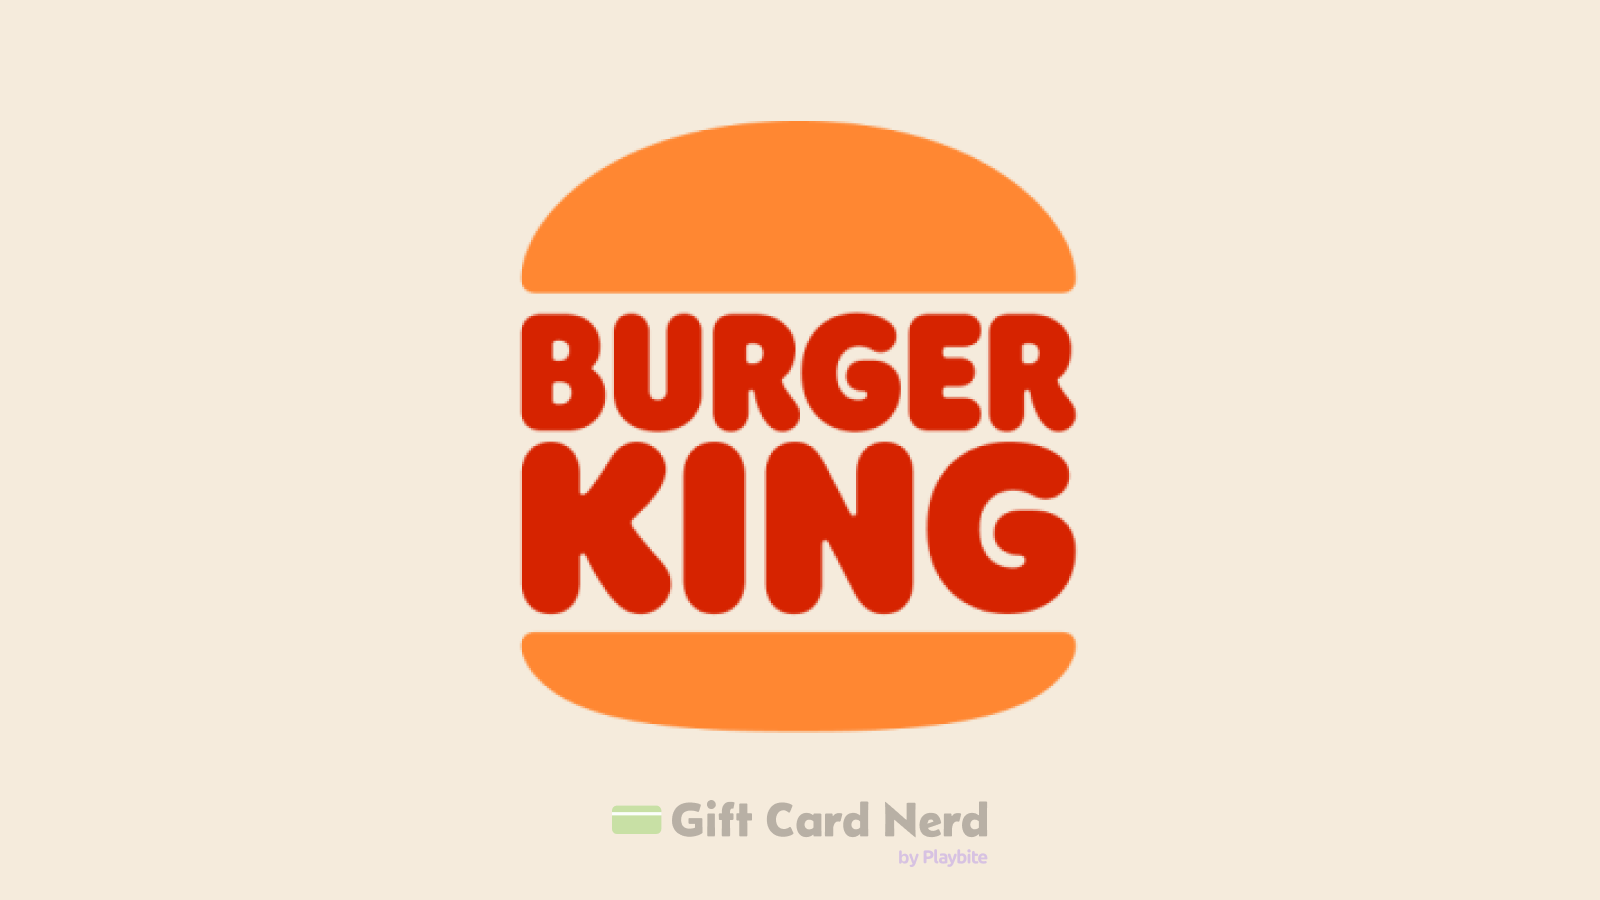 Can I Use a Burger King Gift Card on Roblox?